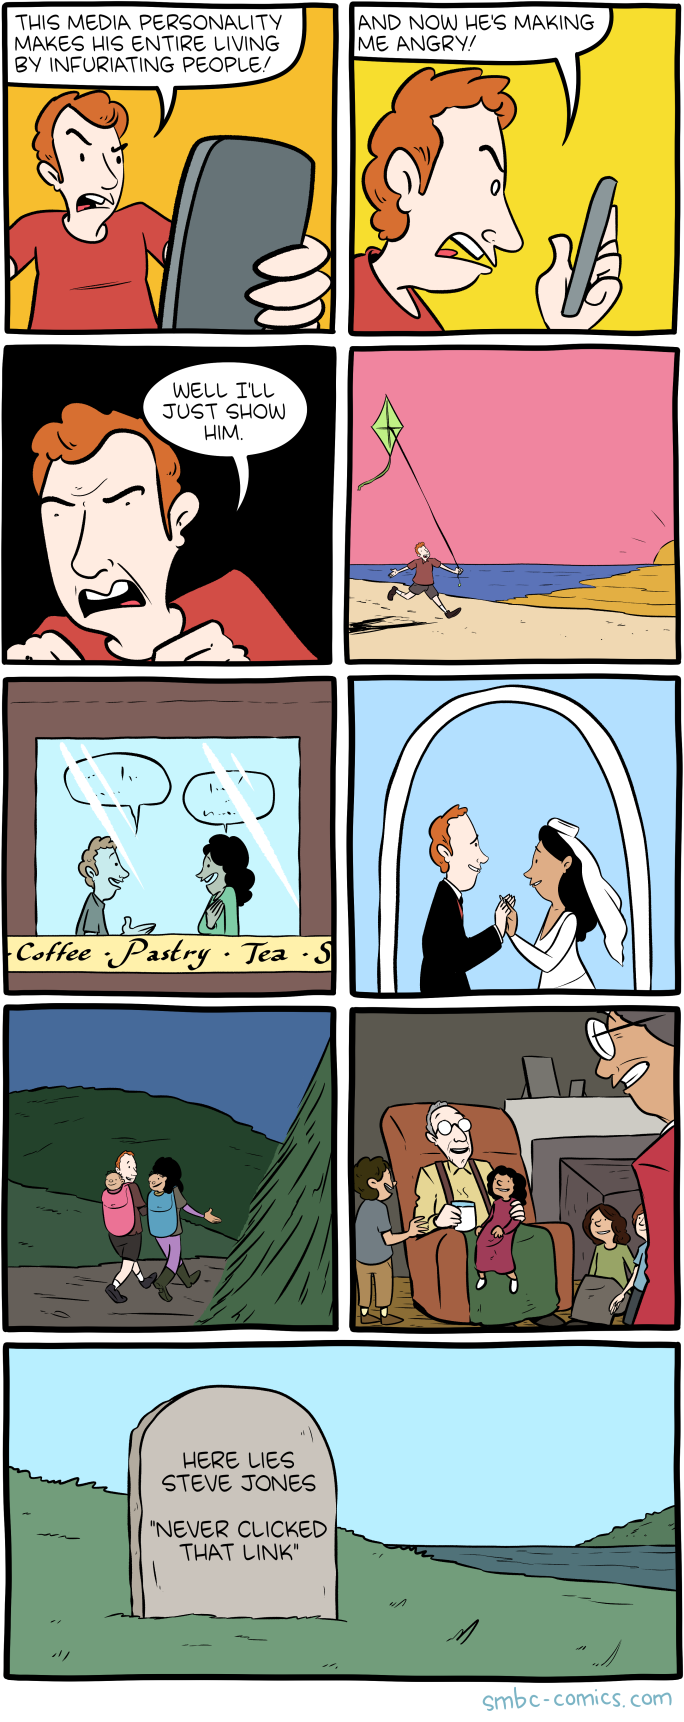 smbc-comics:
“If you enjoyed this, please support SMBC on patreon: https://www.patreon.com/ZachWeinersmith?ty=h
And find more comics ever day here: www.smbc-comics.com
”